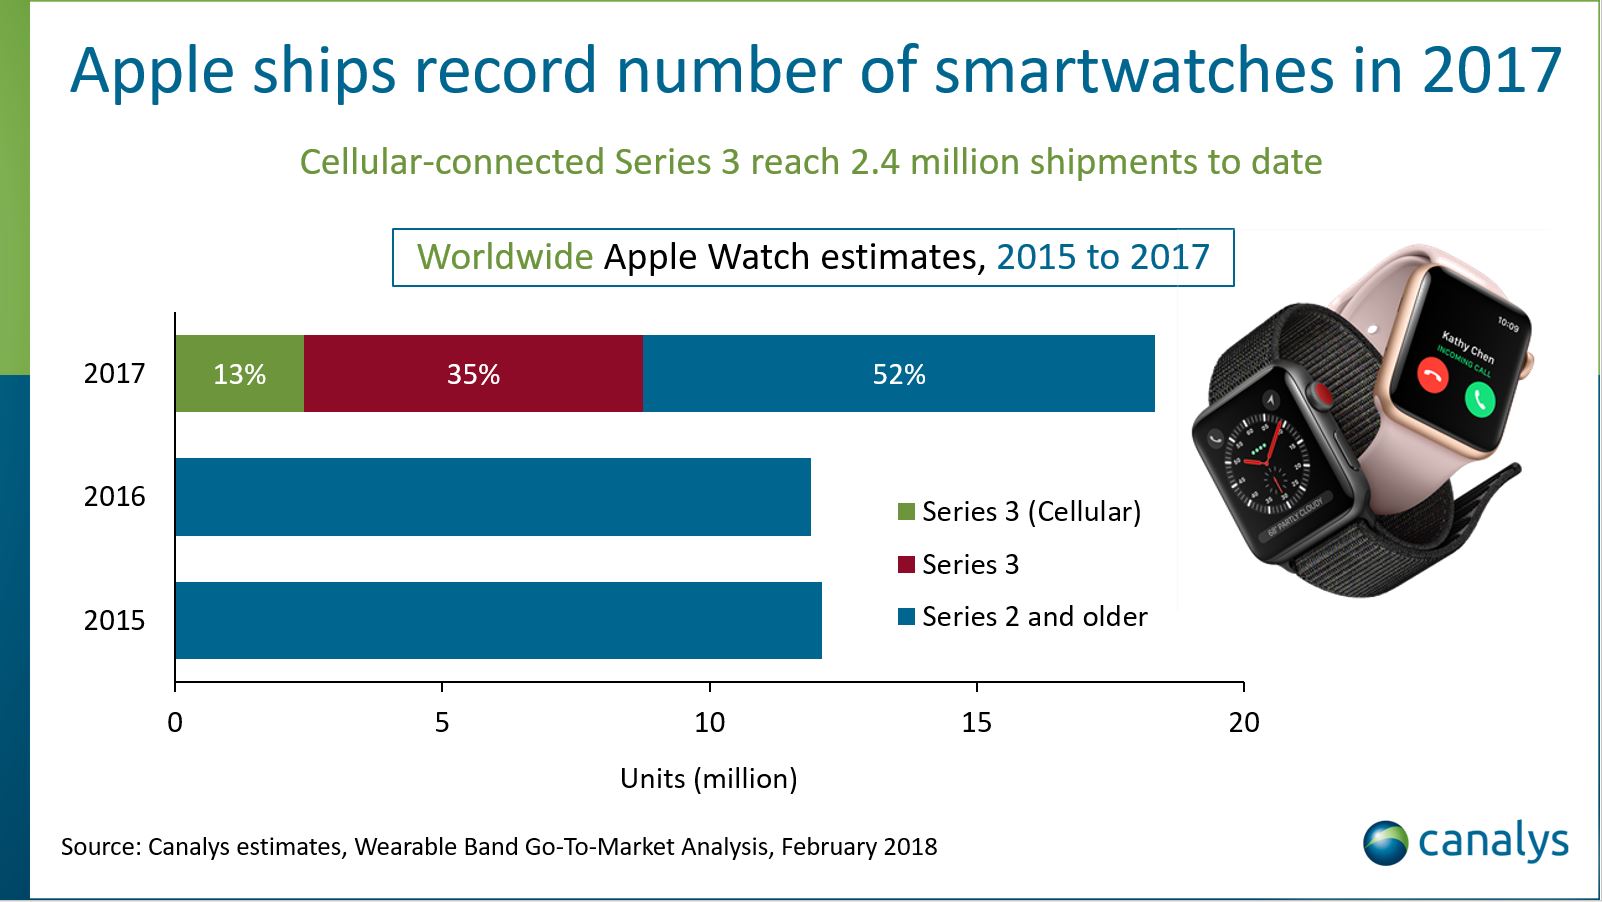 Apple Watch Canalys Sales Record